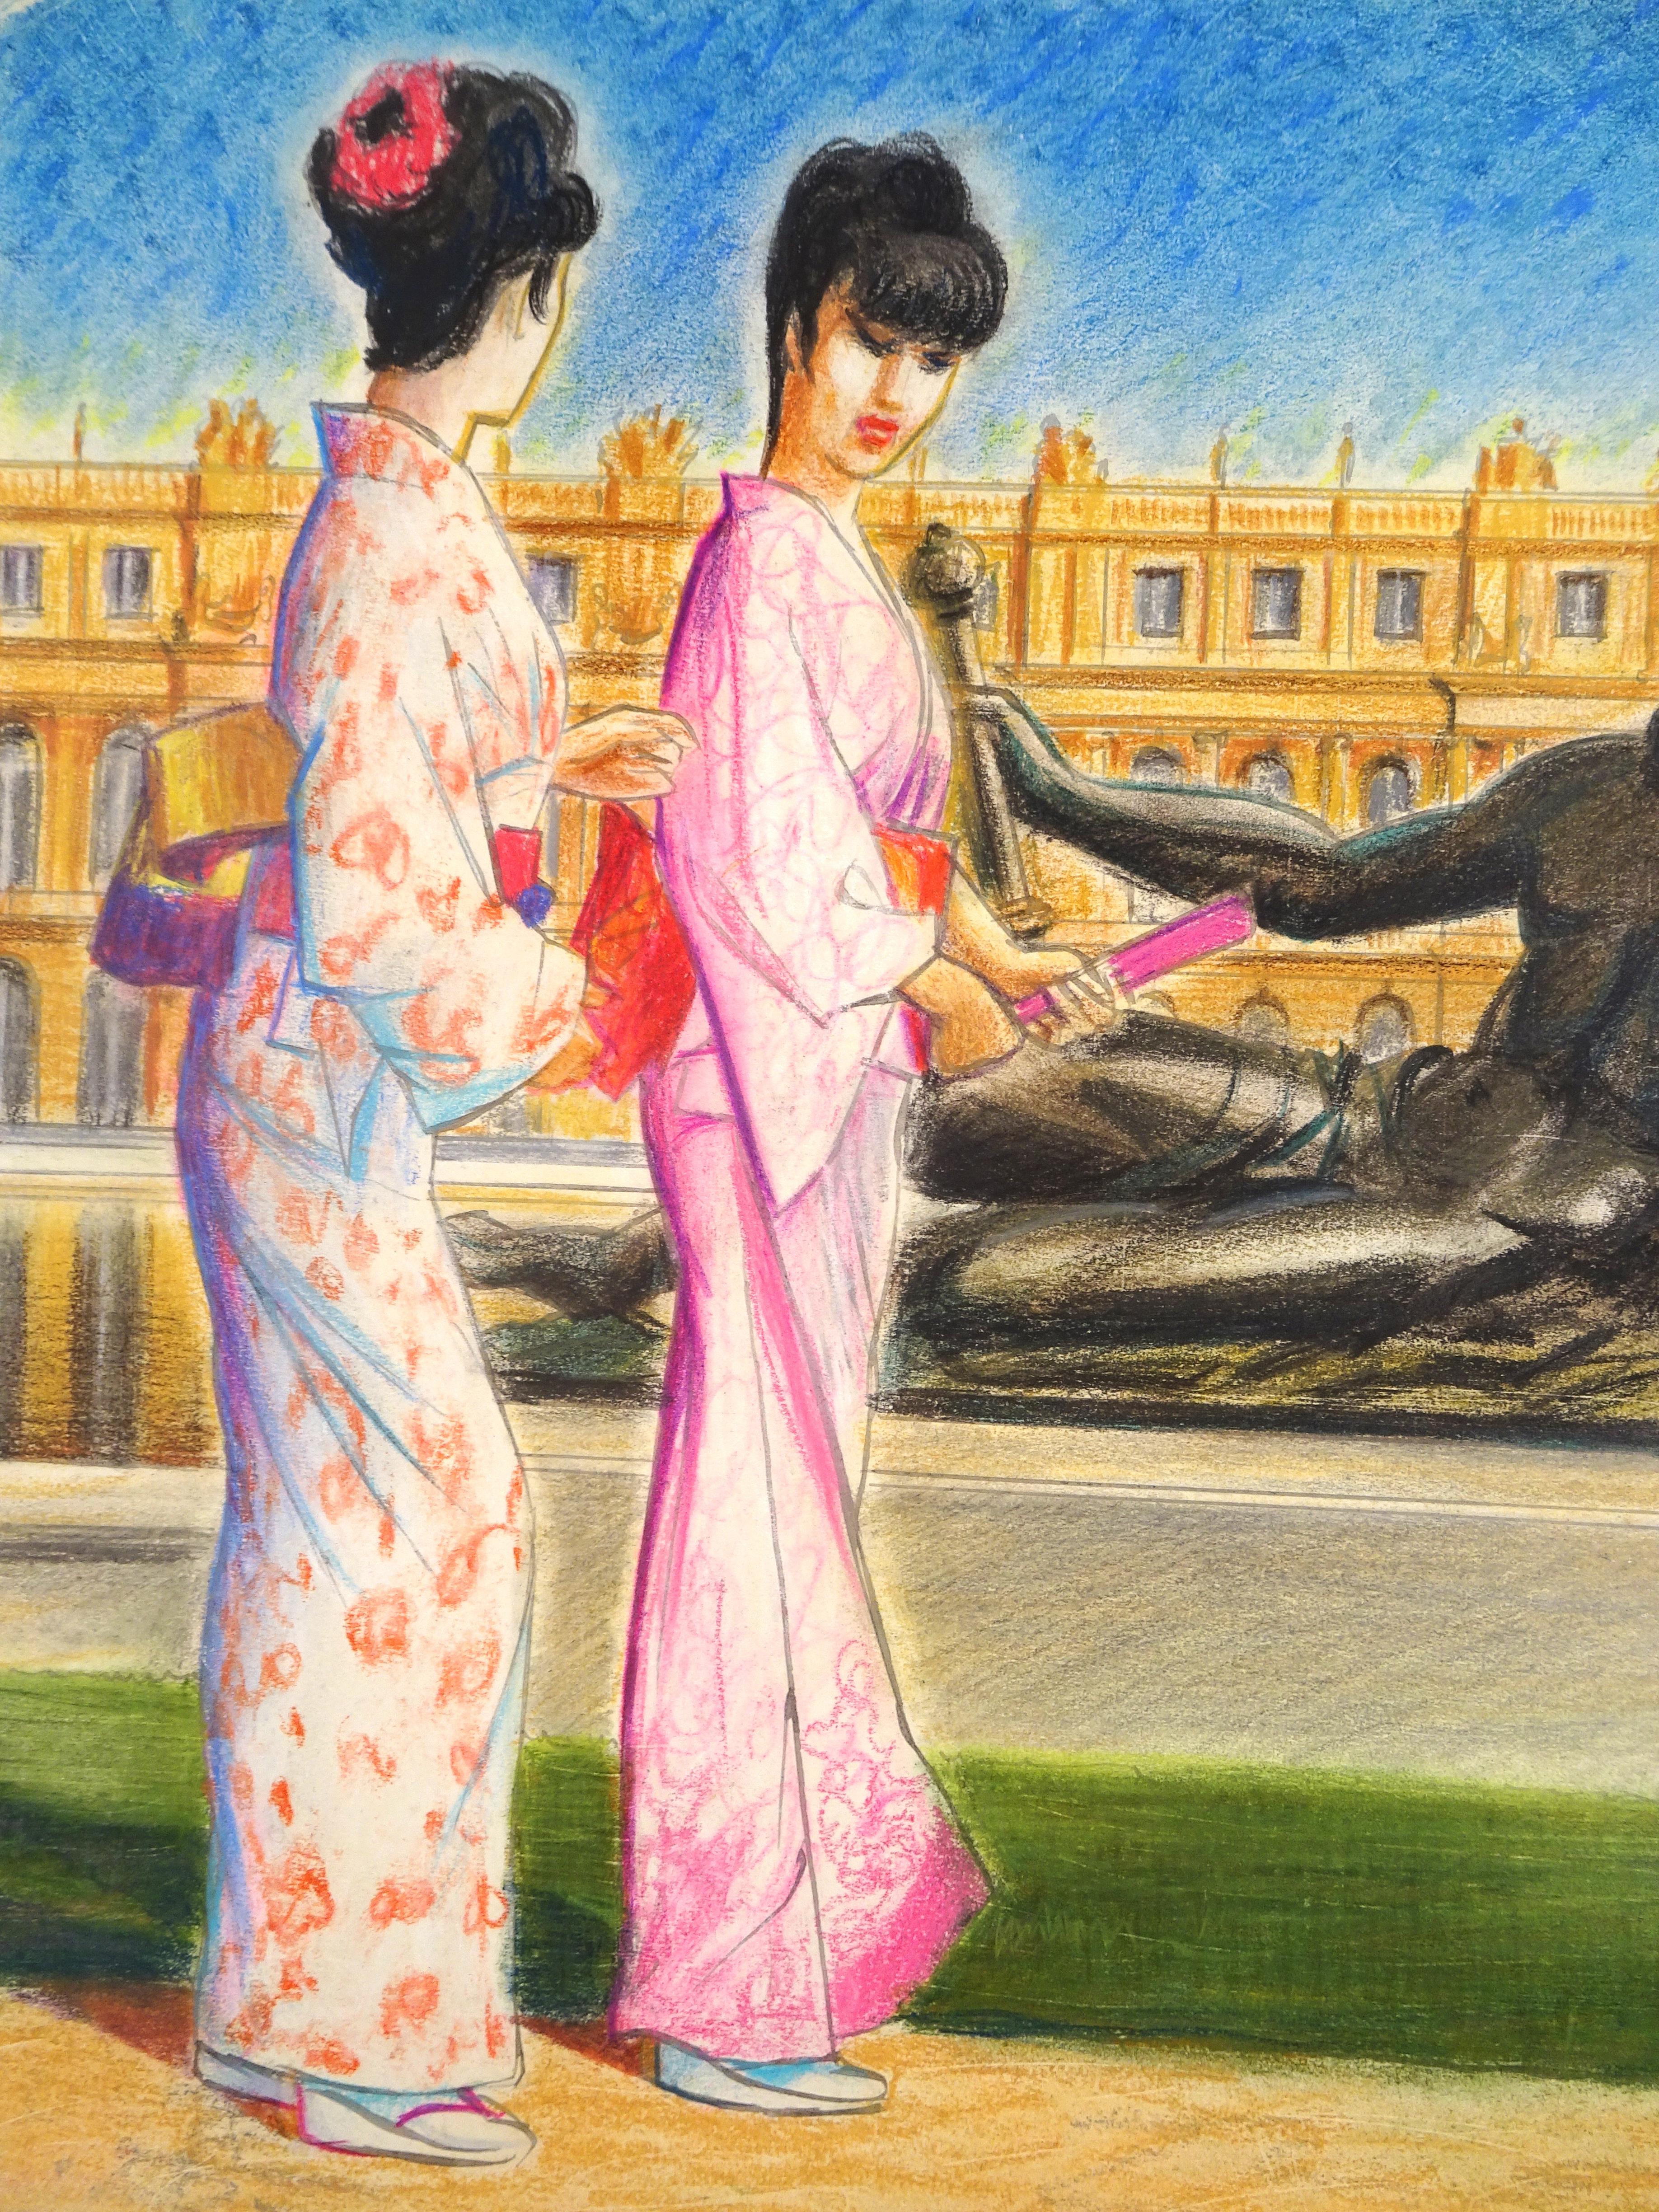 Kimonos at Versailles is an original artwork realized in 1984 by Emile Deschler.

Pastel on cardboard.

Hand-signed and dated on the lower right.

Very good conditions.

Emile Deschler (France, 1910 - 1991) was a French painter. In 1930, he was